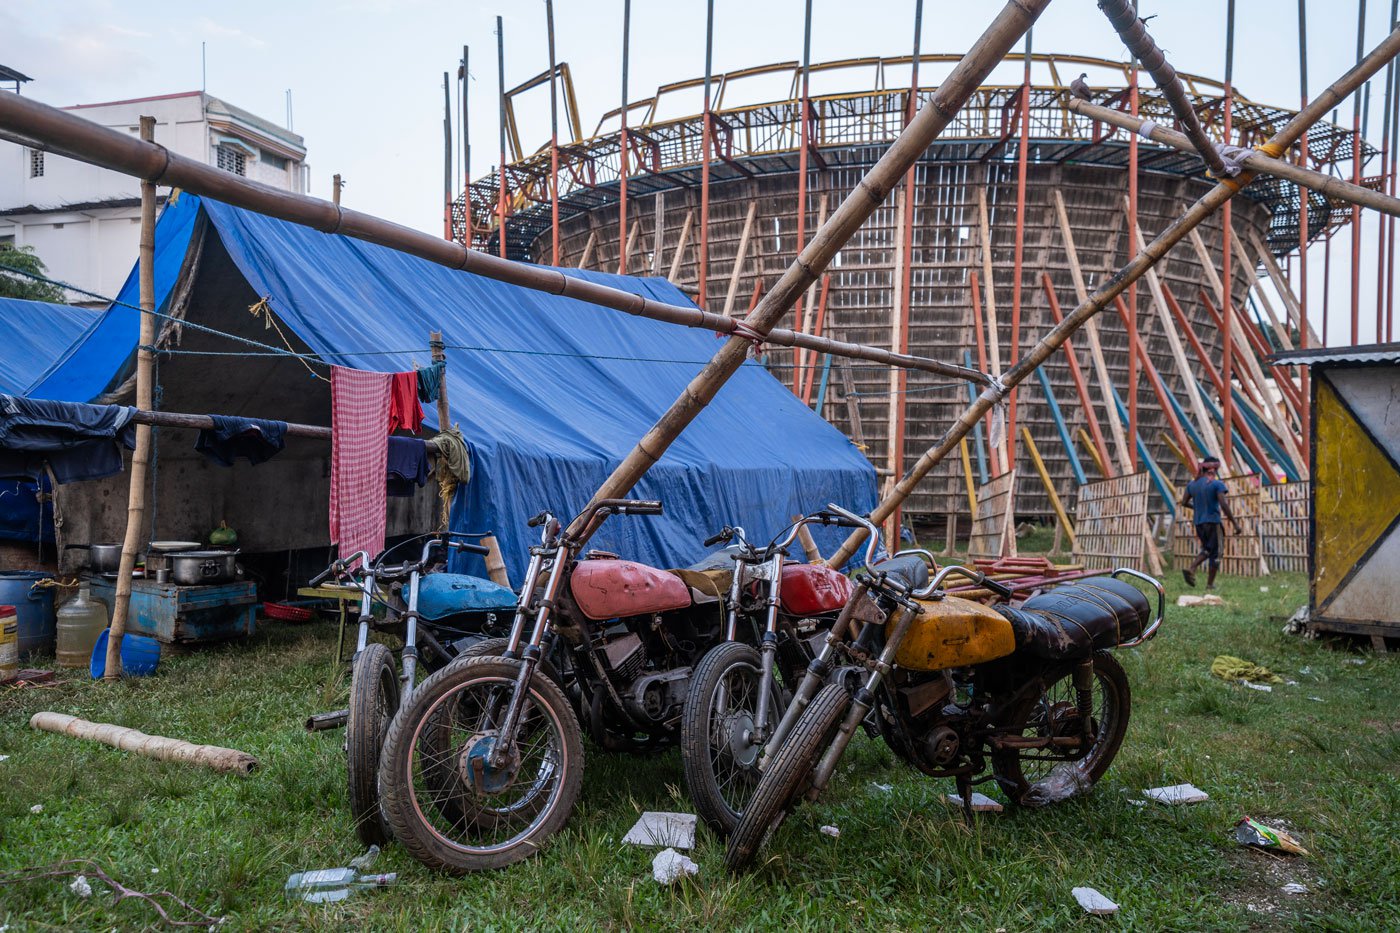 Four Yamaha RX-135 bikes, used in the act, are kept beside the makeshift camp where the riders live during the mela days. Rubel Sheikh says he has used these same motorcycles for more than 10 years now but are well-maintained and 'they get serviced regularly'